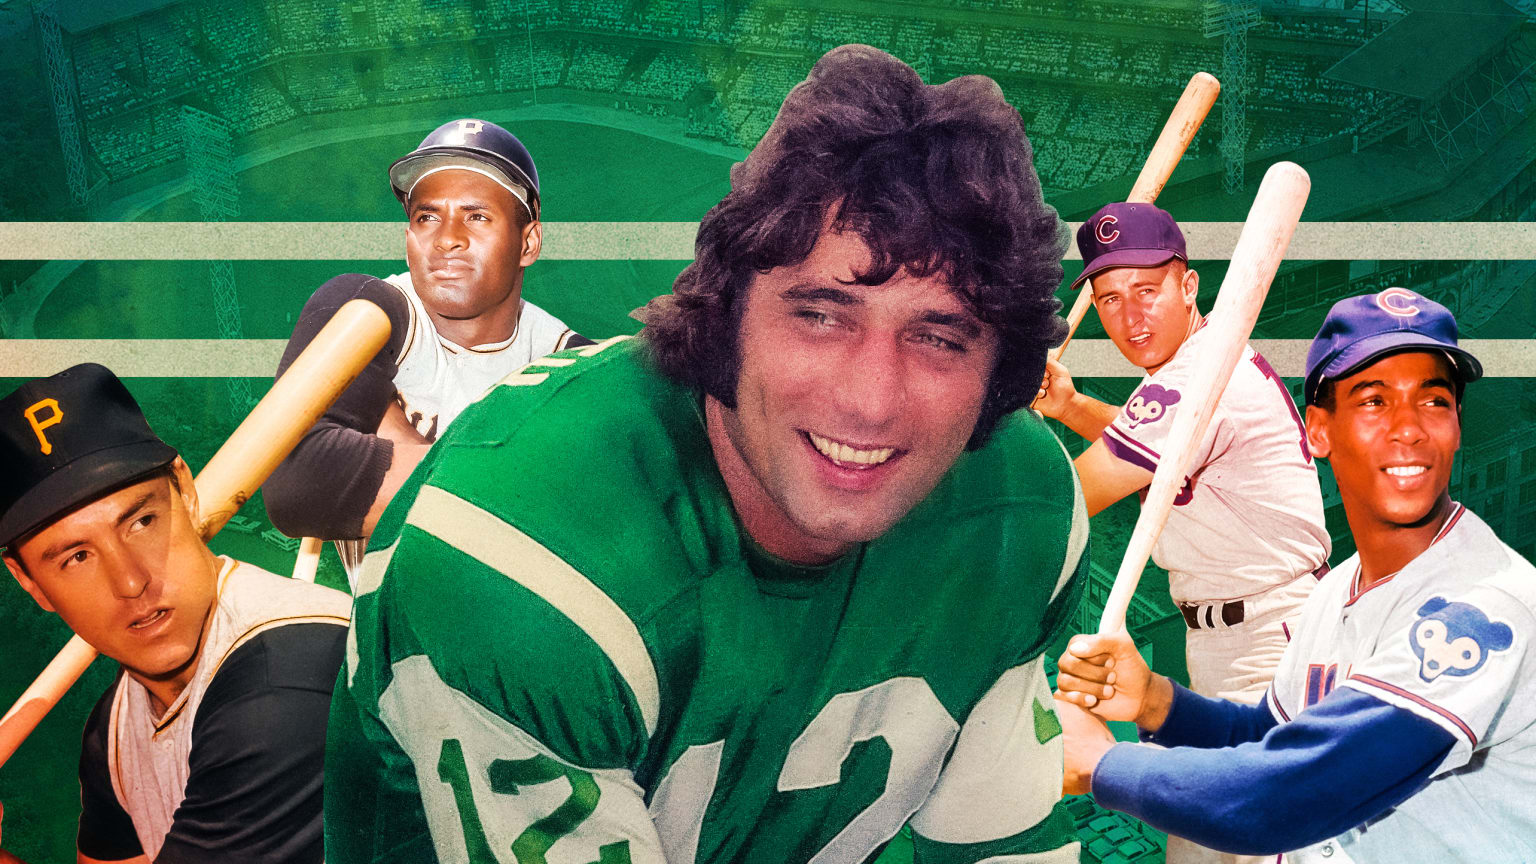 Joe Namath is pictured with four baseball players around him